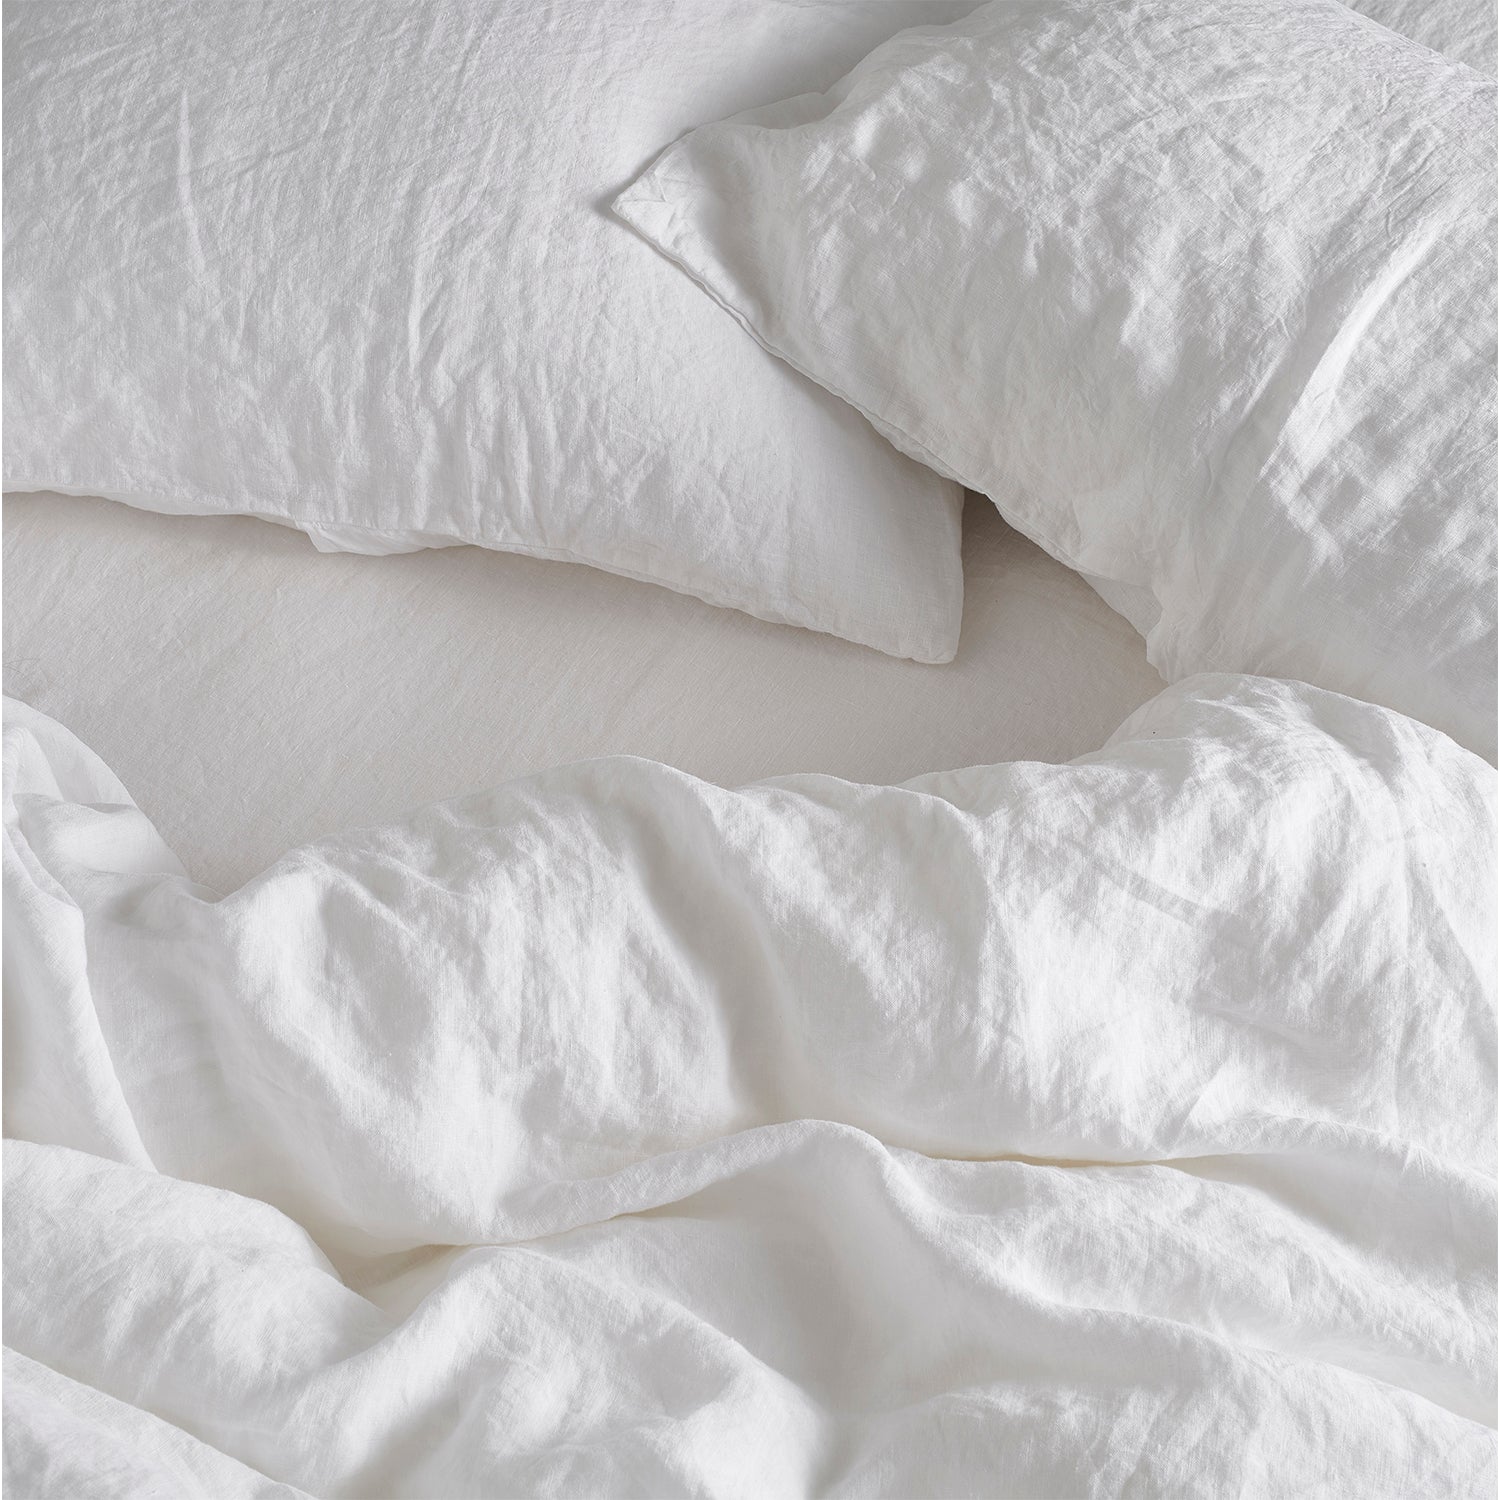 Introducing Linen: What Are the Bedding Benefits?